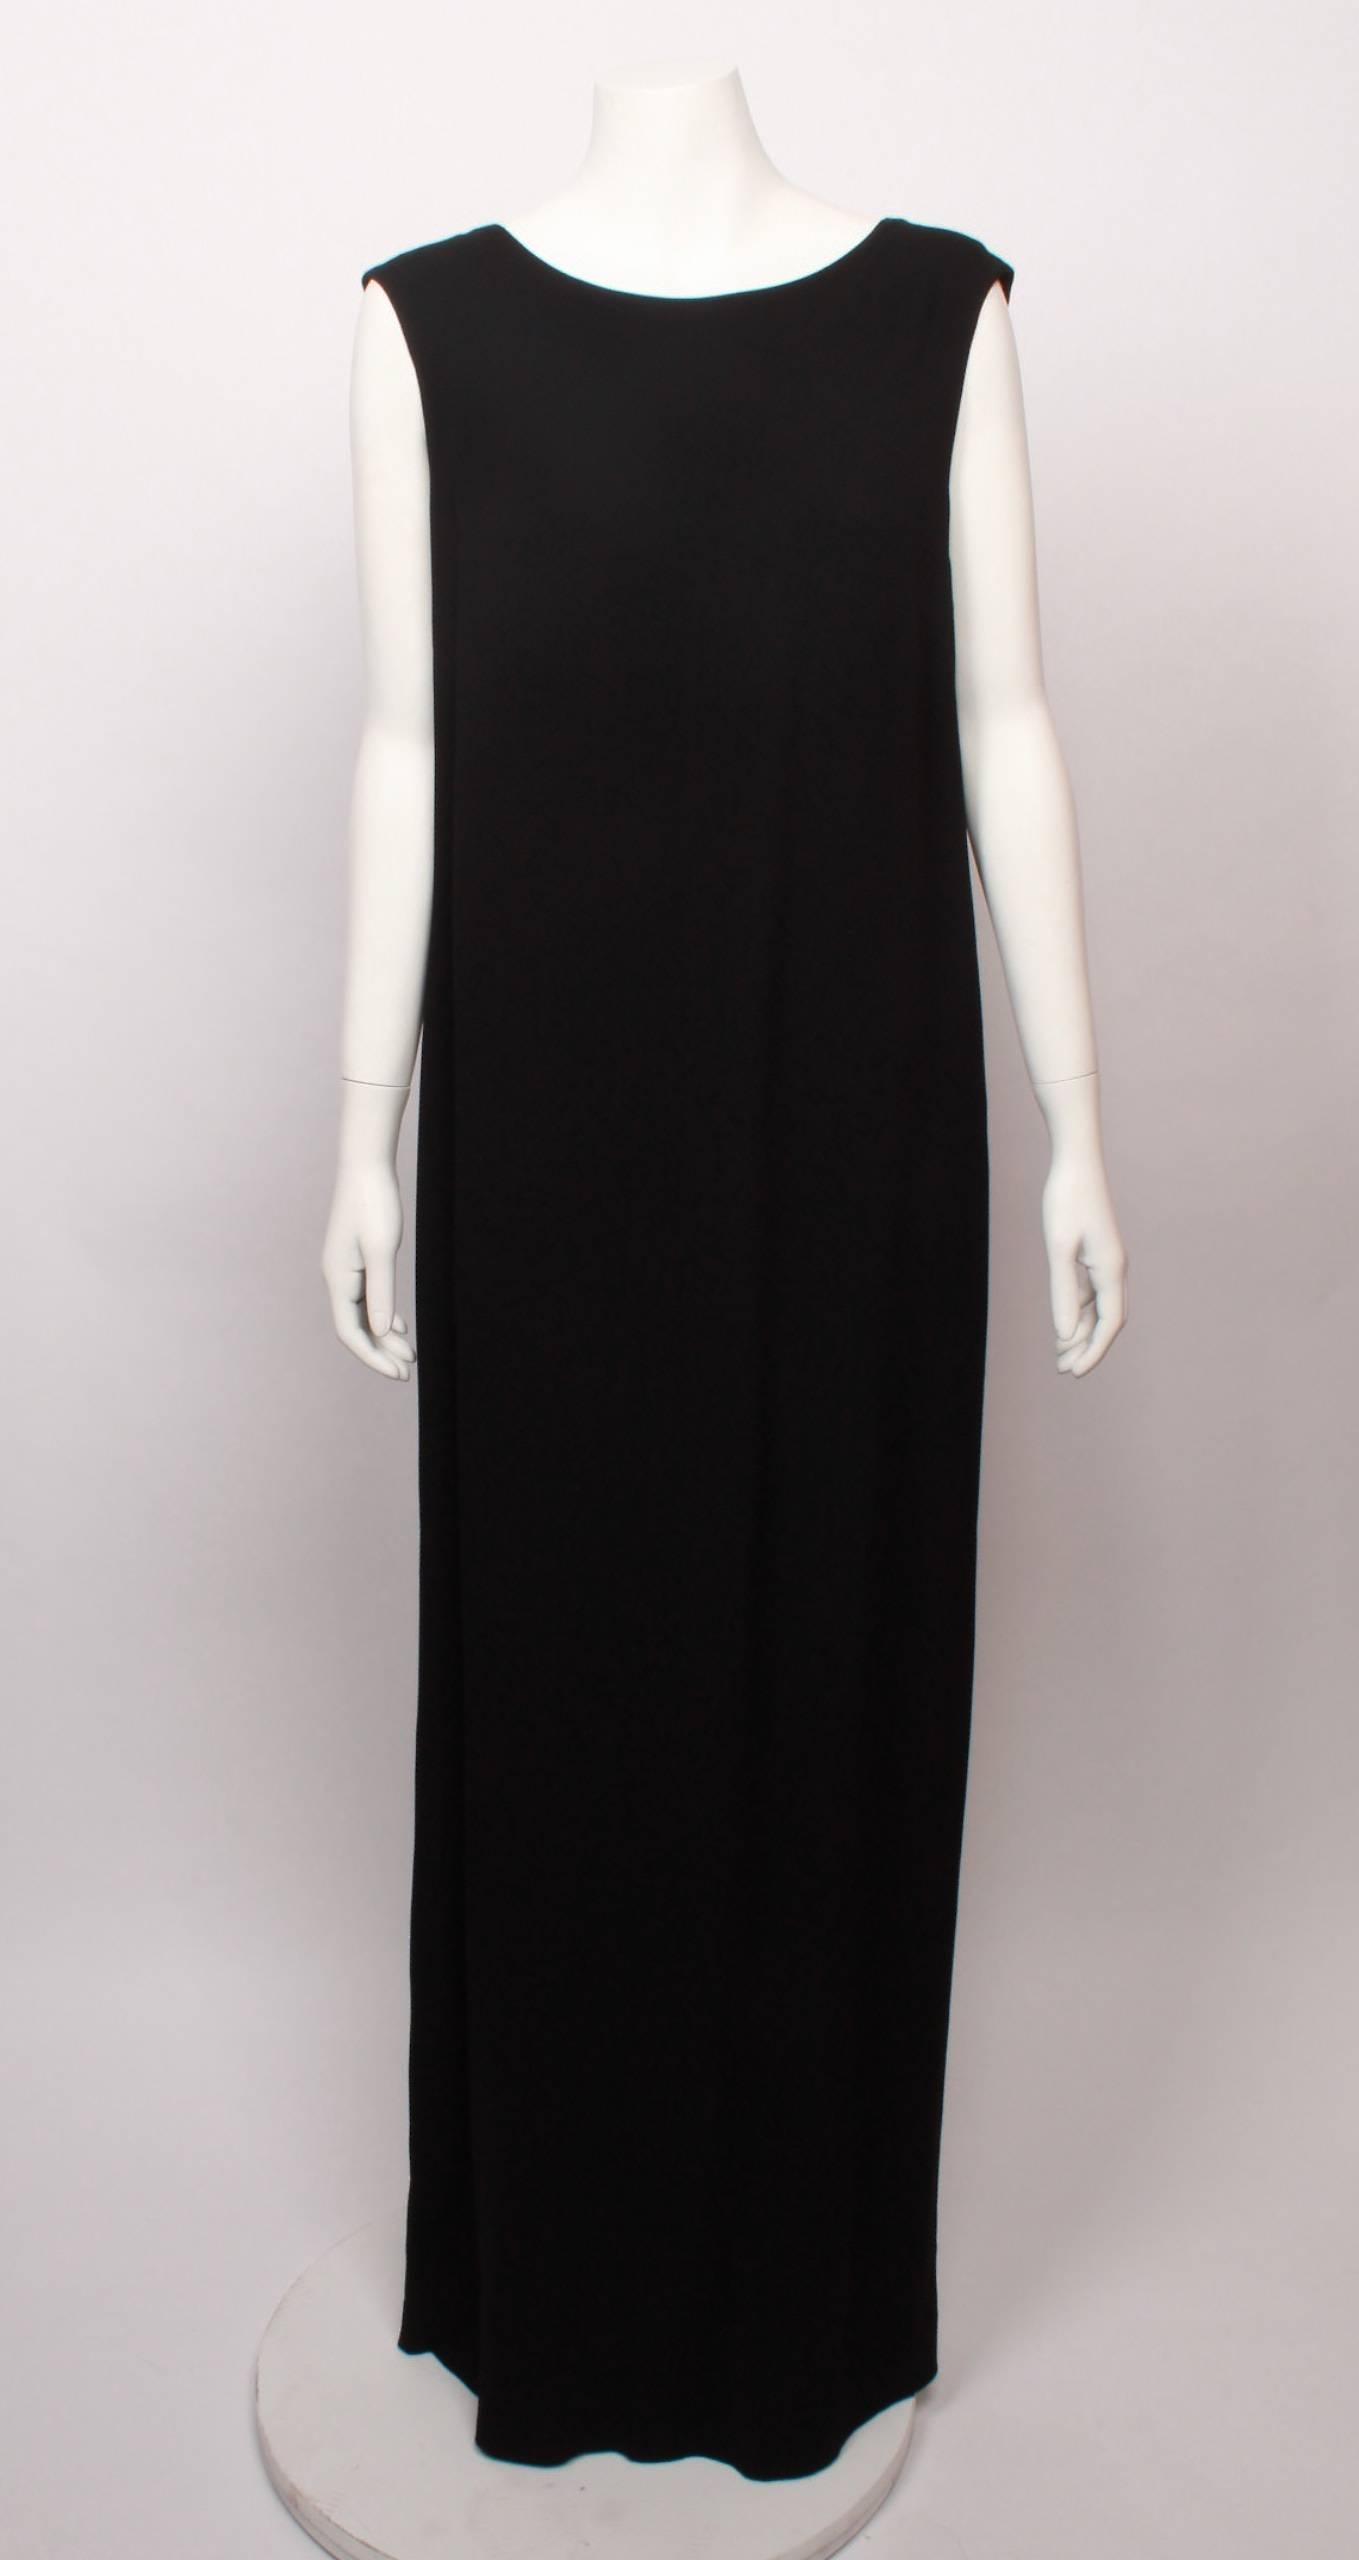 A fantastic example of timeless Maison Martim Margiela. Chic and minimal black sleeveless maxi sheath dress with satin panel featuring nickel zipper trim. Open V slit neckline.
 A must have for the MMM collector. 
In very good condition. Made in